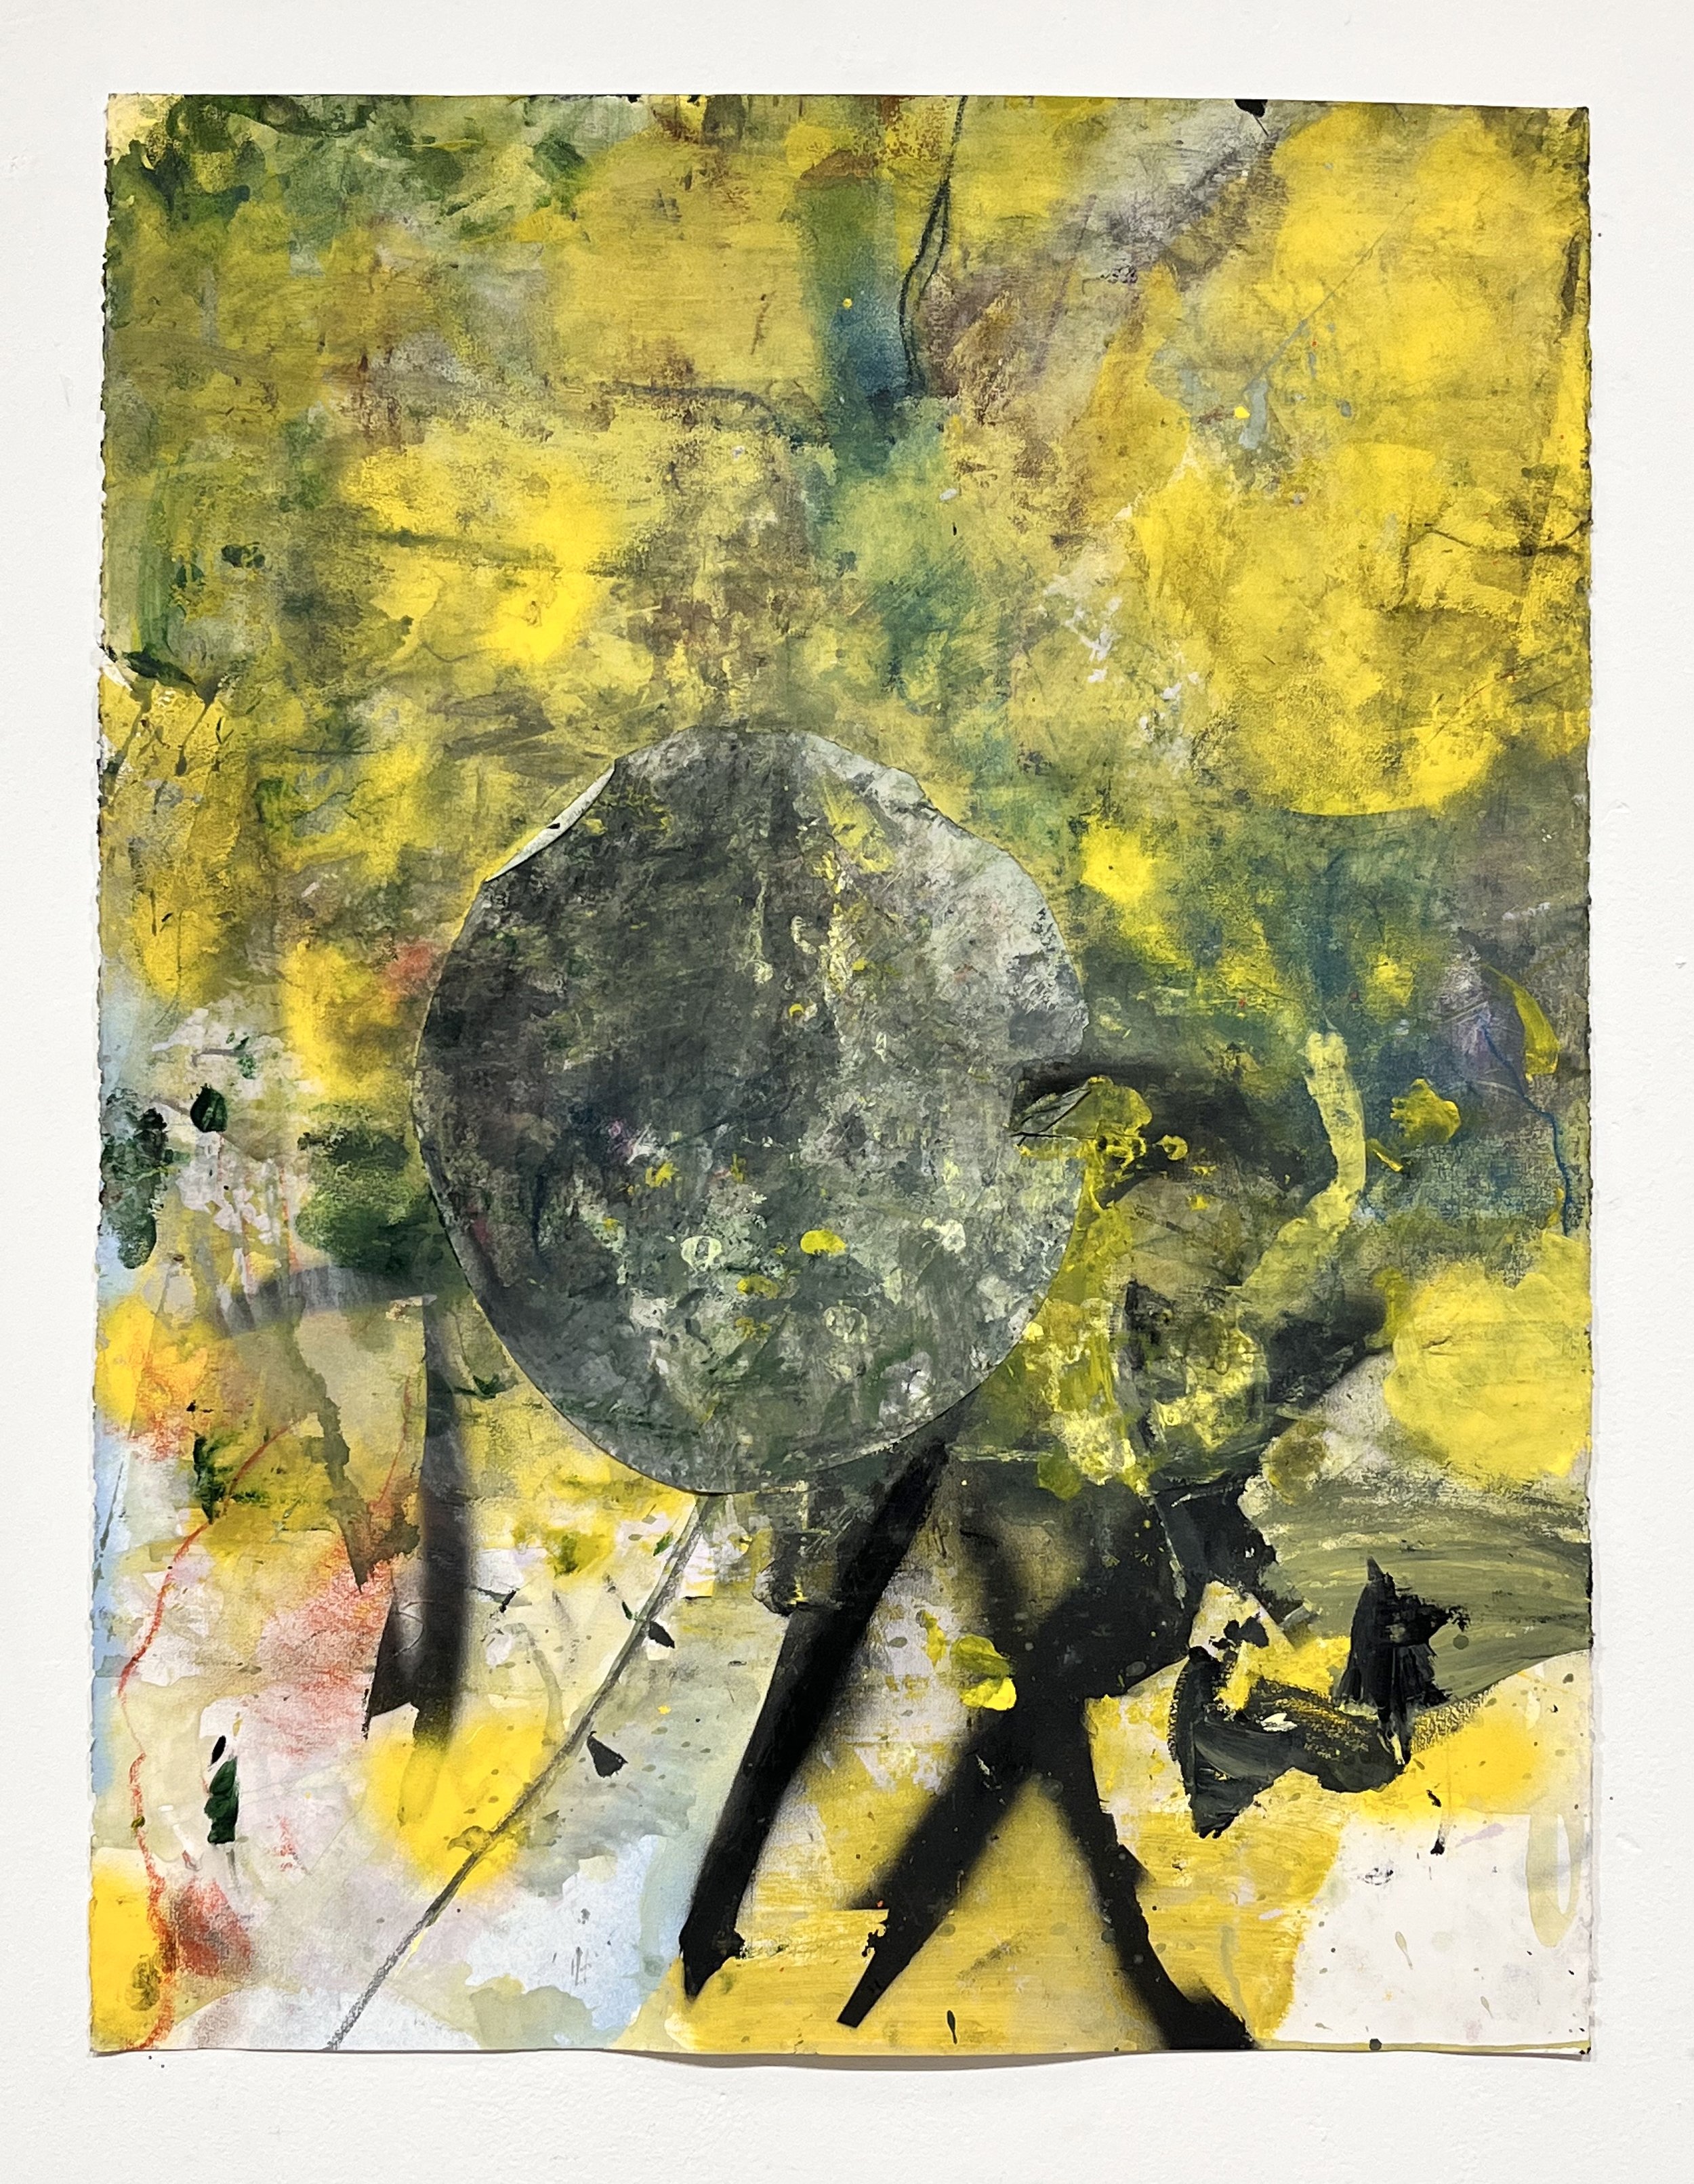 Swallowed Stone, 2022, mixed media on paper, 30 x 22 ½ inches